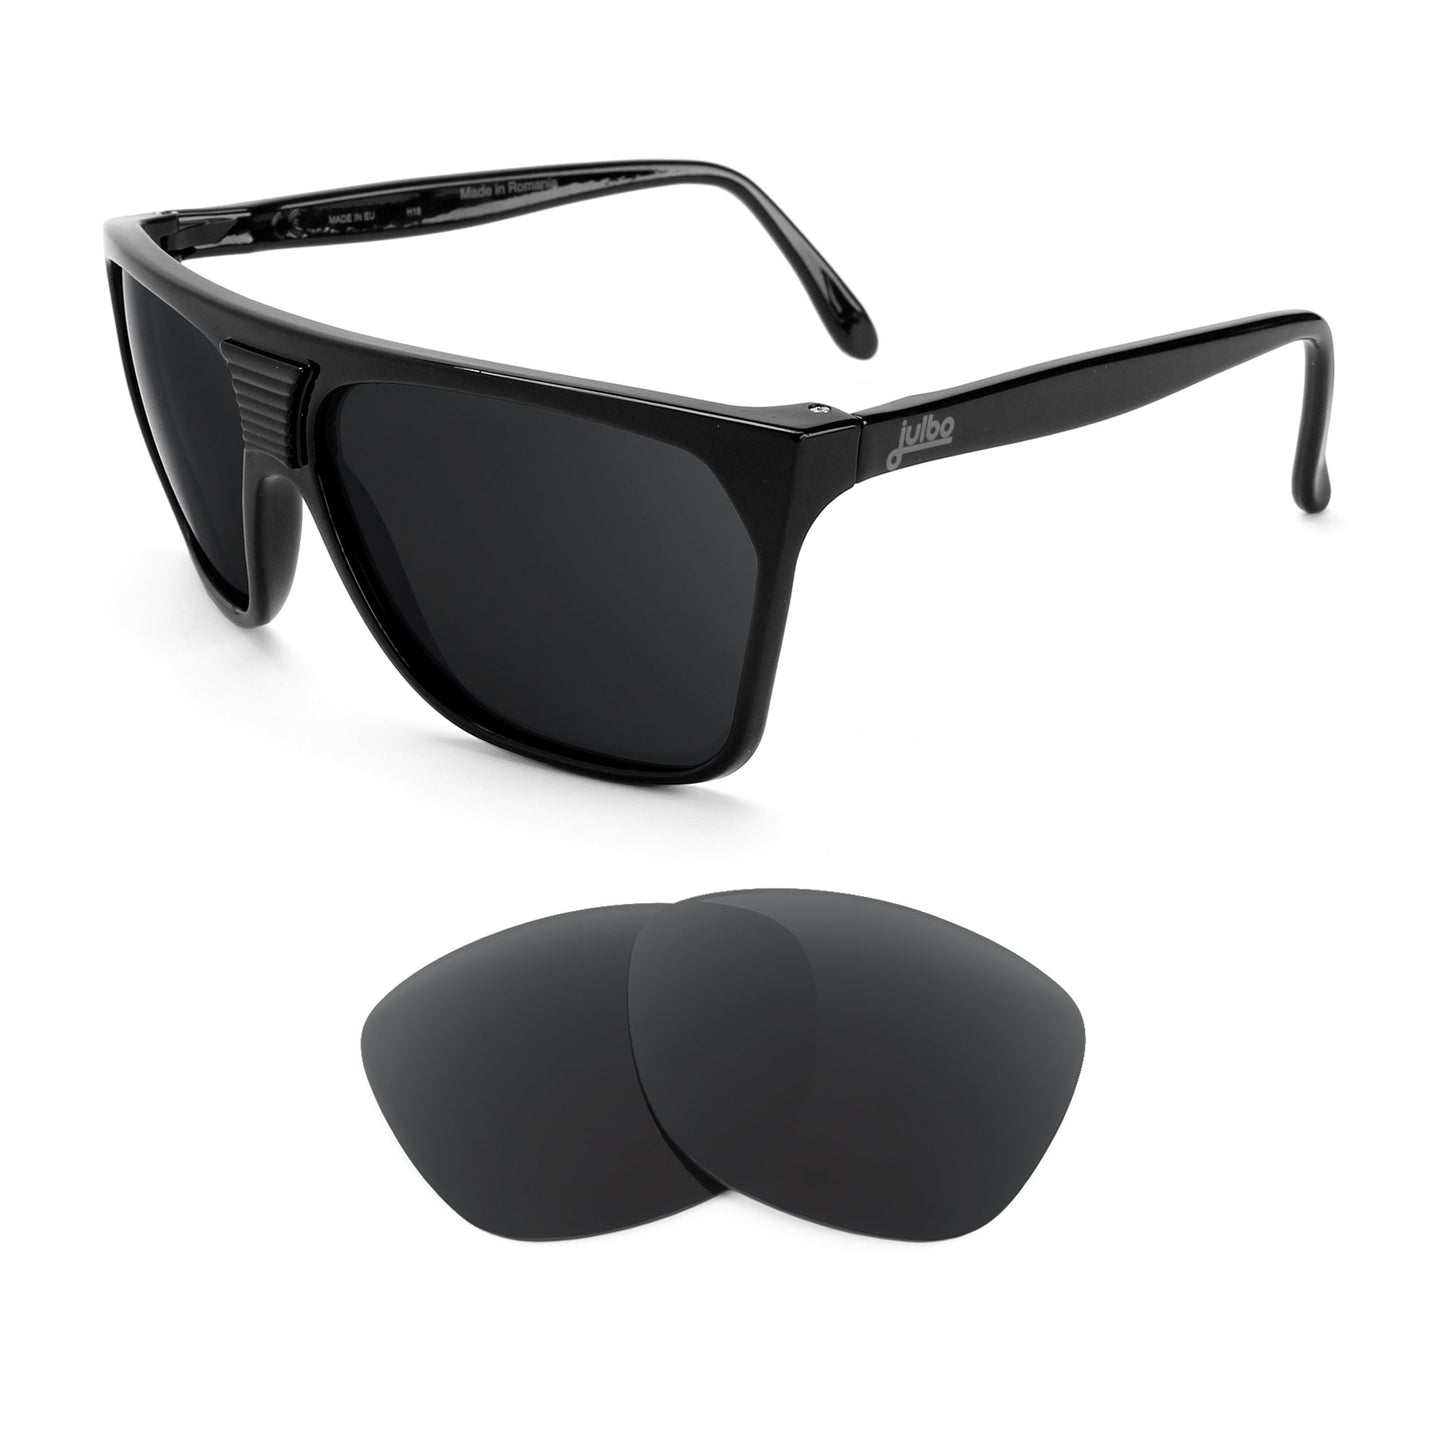 Julbo Cortina sunglasses with replacement lenses